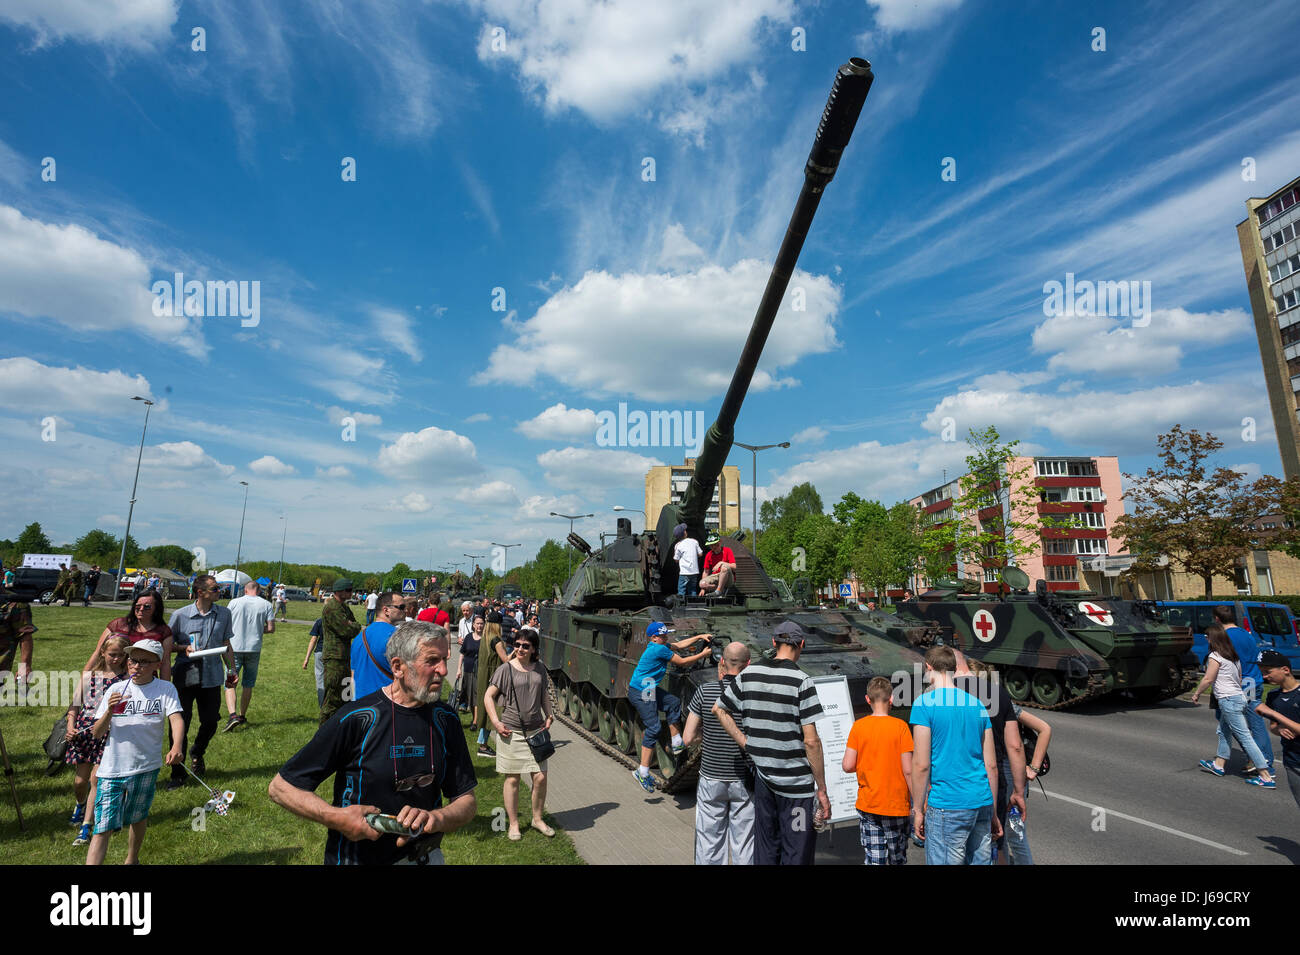 Vilnius, Lithuania. 20th May, 2017. People watch a Leopard 2 tank in Panevezys, northern city of Lithuania, May 20, 2017. Lithuania celebrated Armed Forces and Public Unity Day in northern city of Panevezys on Saturday. Credit: Alfredas Pliadis/Xinhua/Alamy Live News Stock Photo